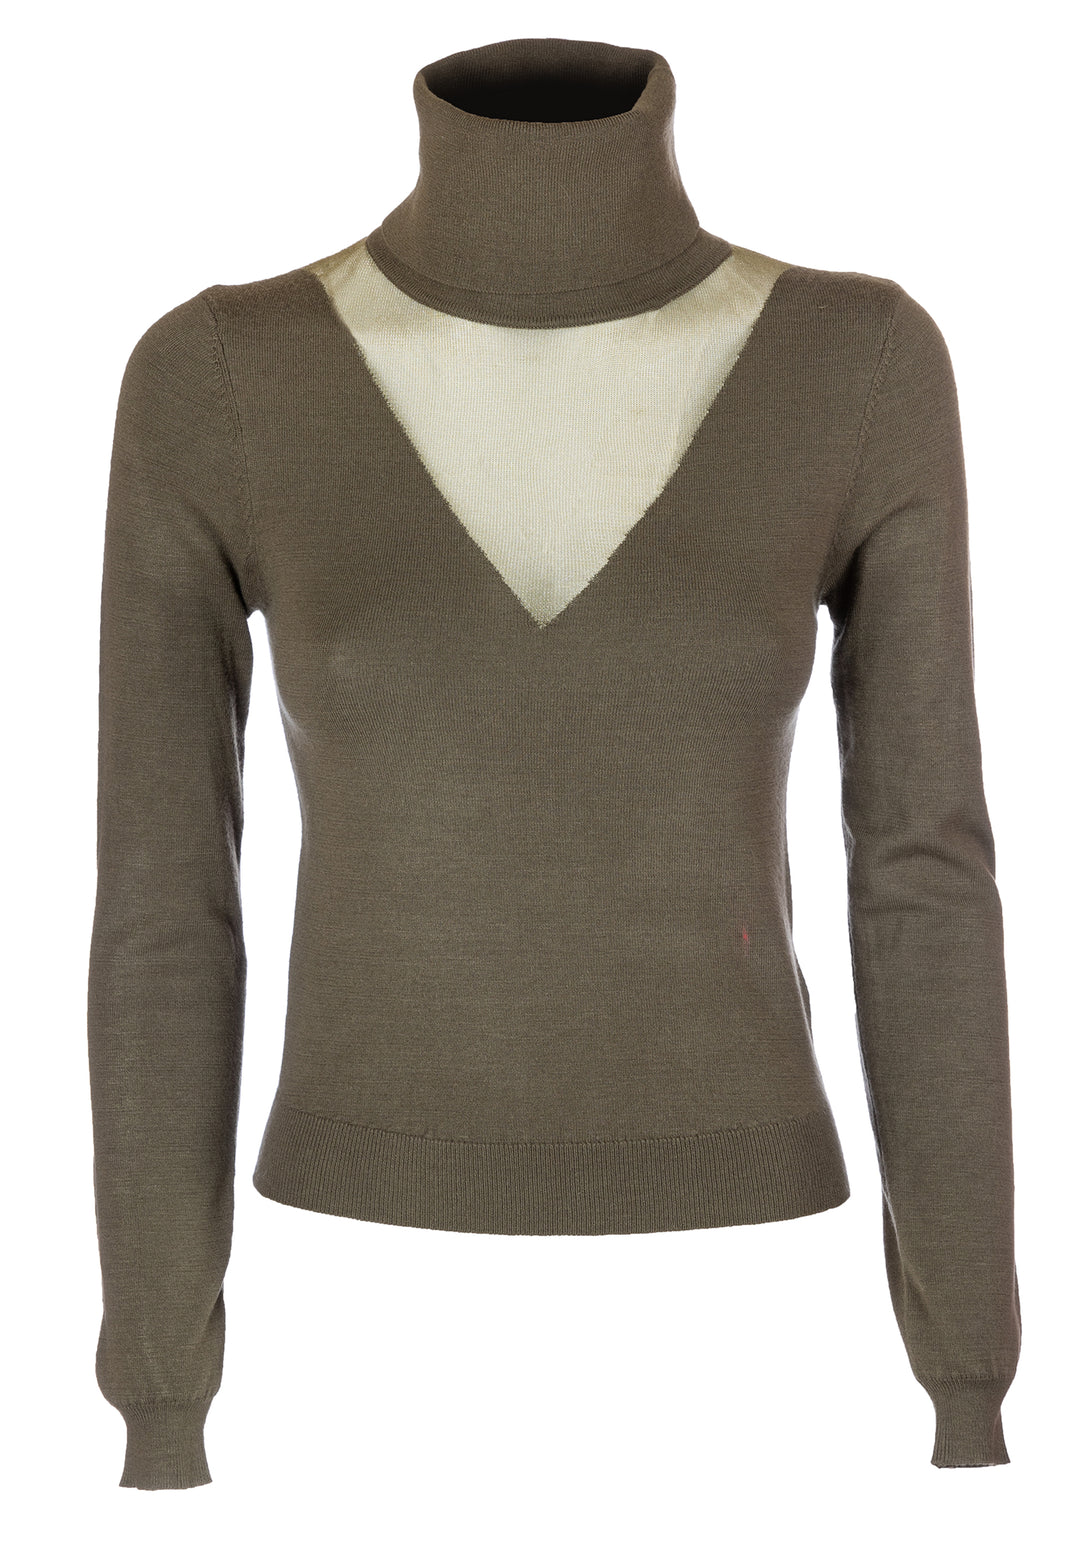 Knitwear slim fit with high neck